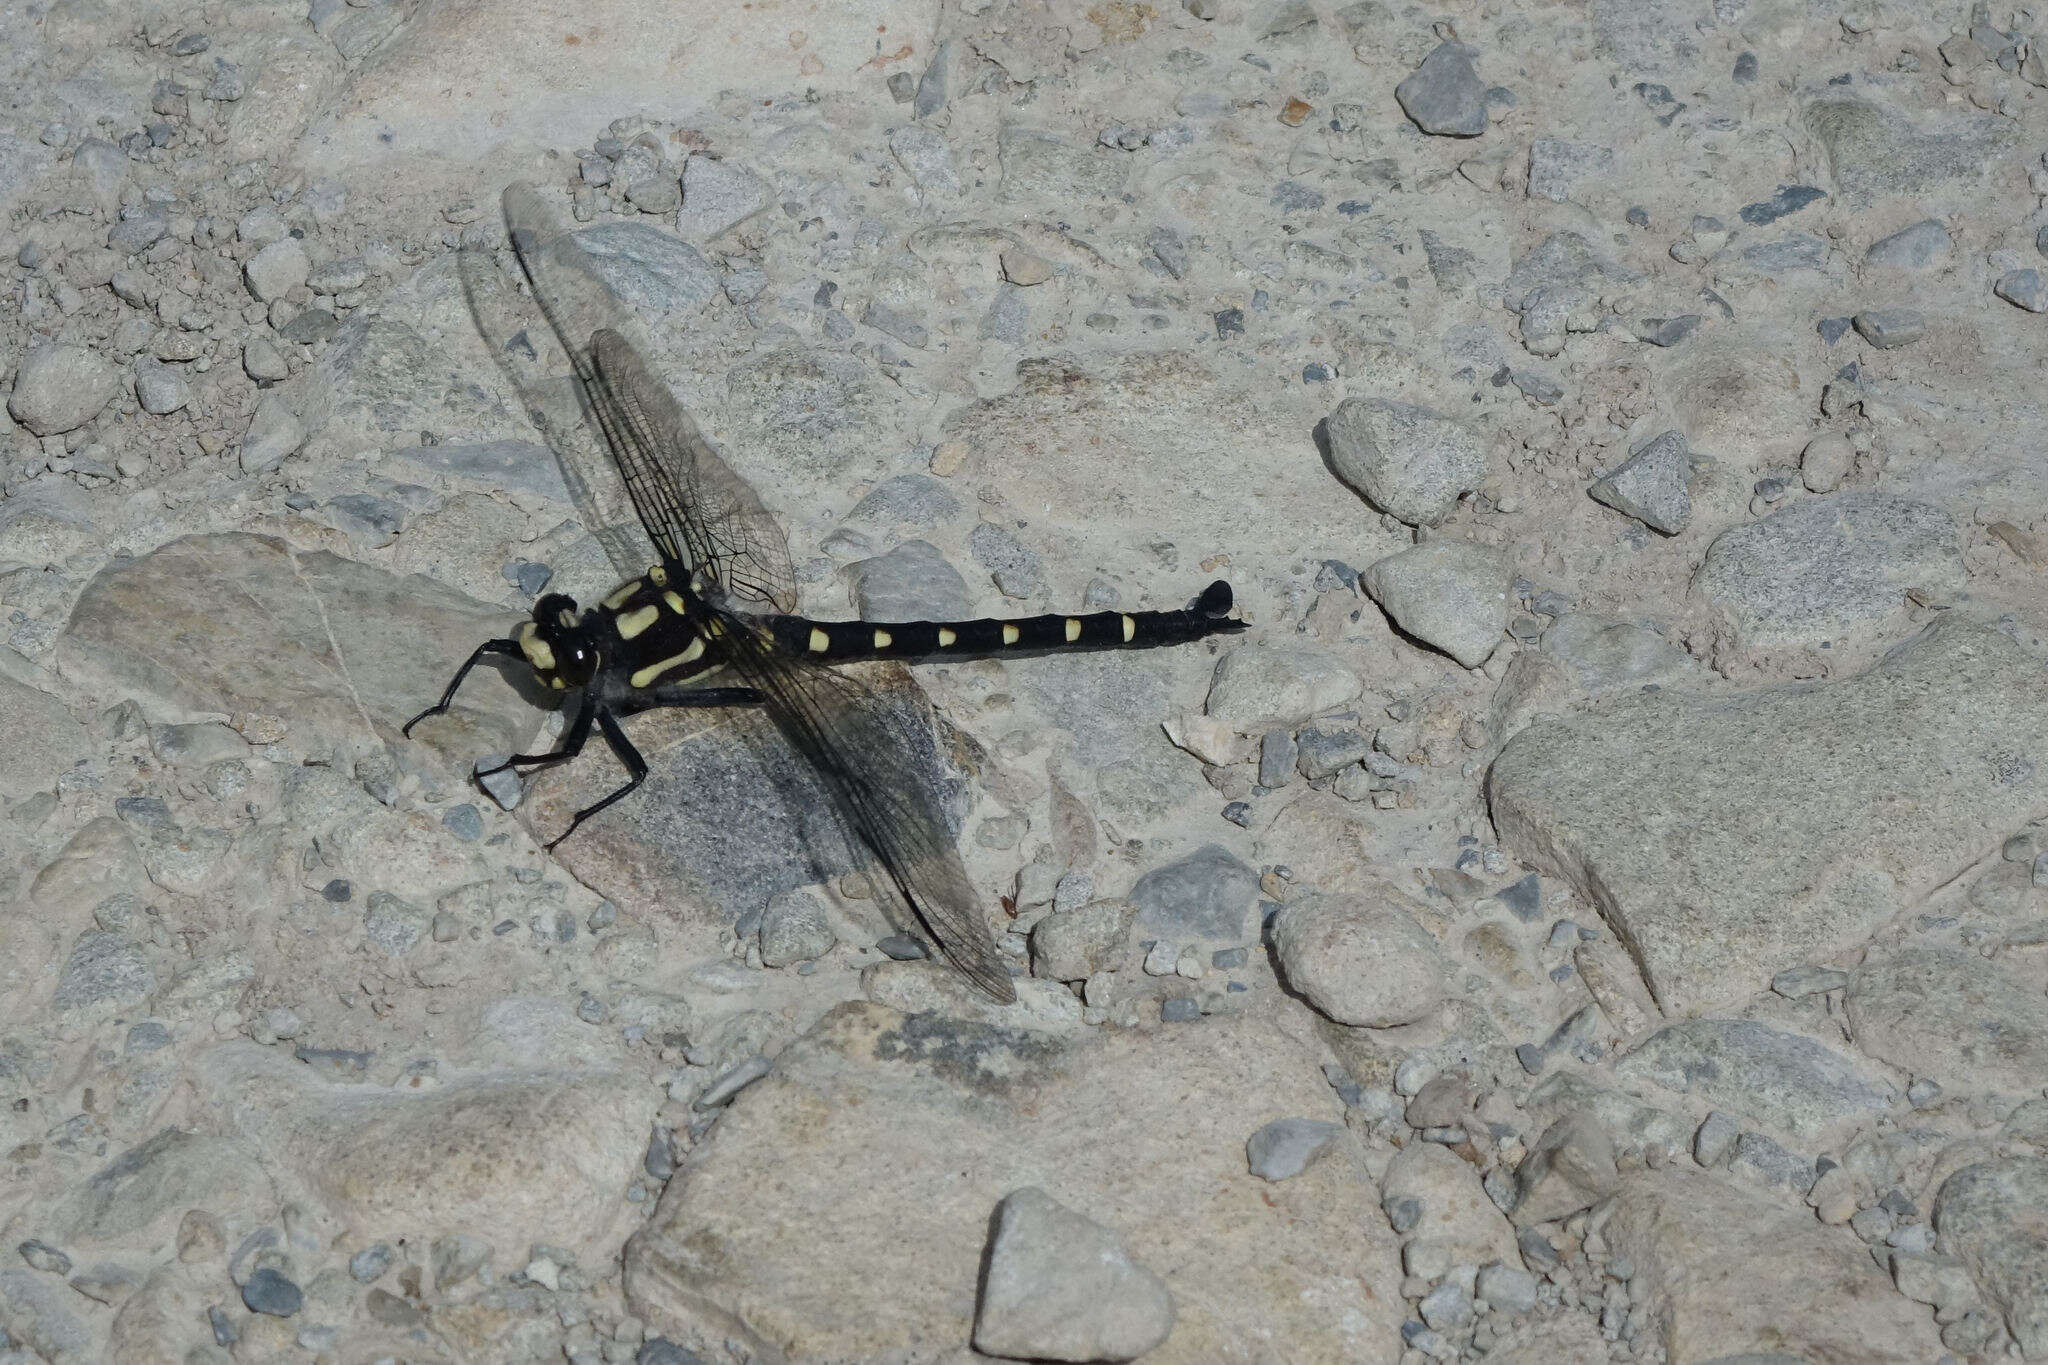 Image of Mountain Giant Dragonfly